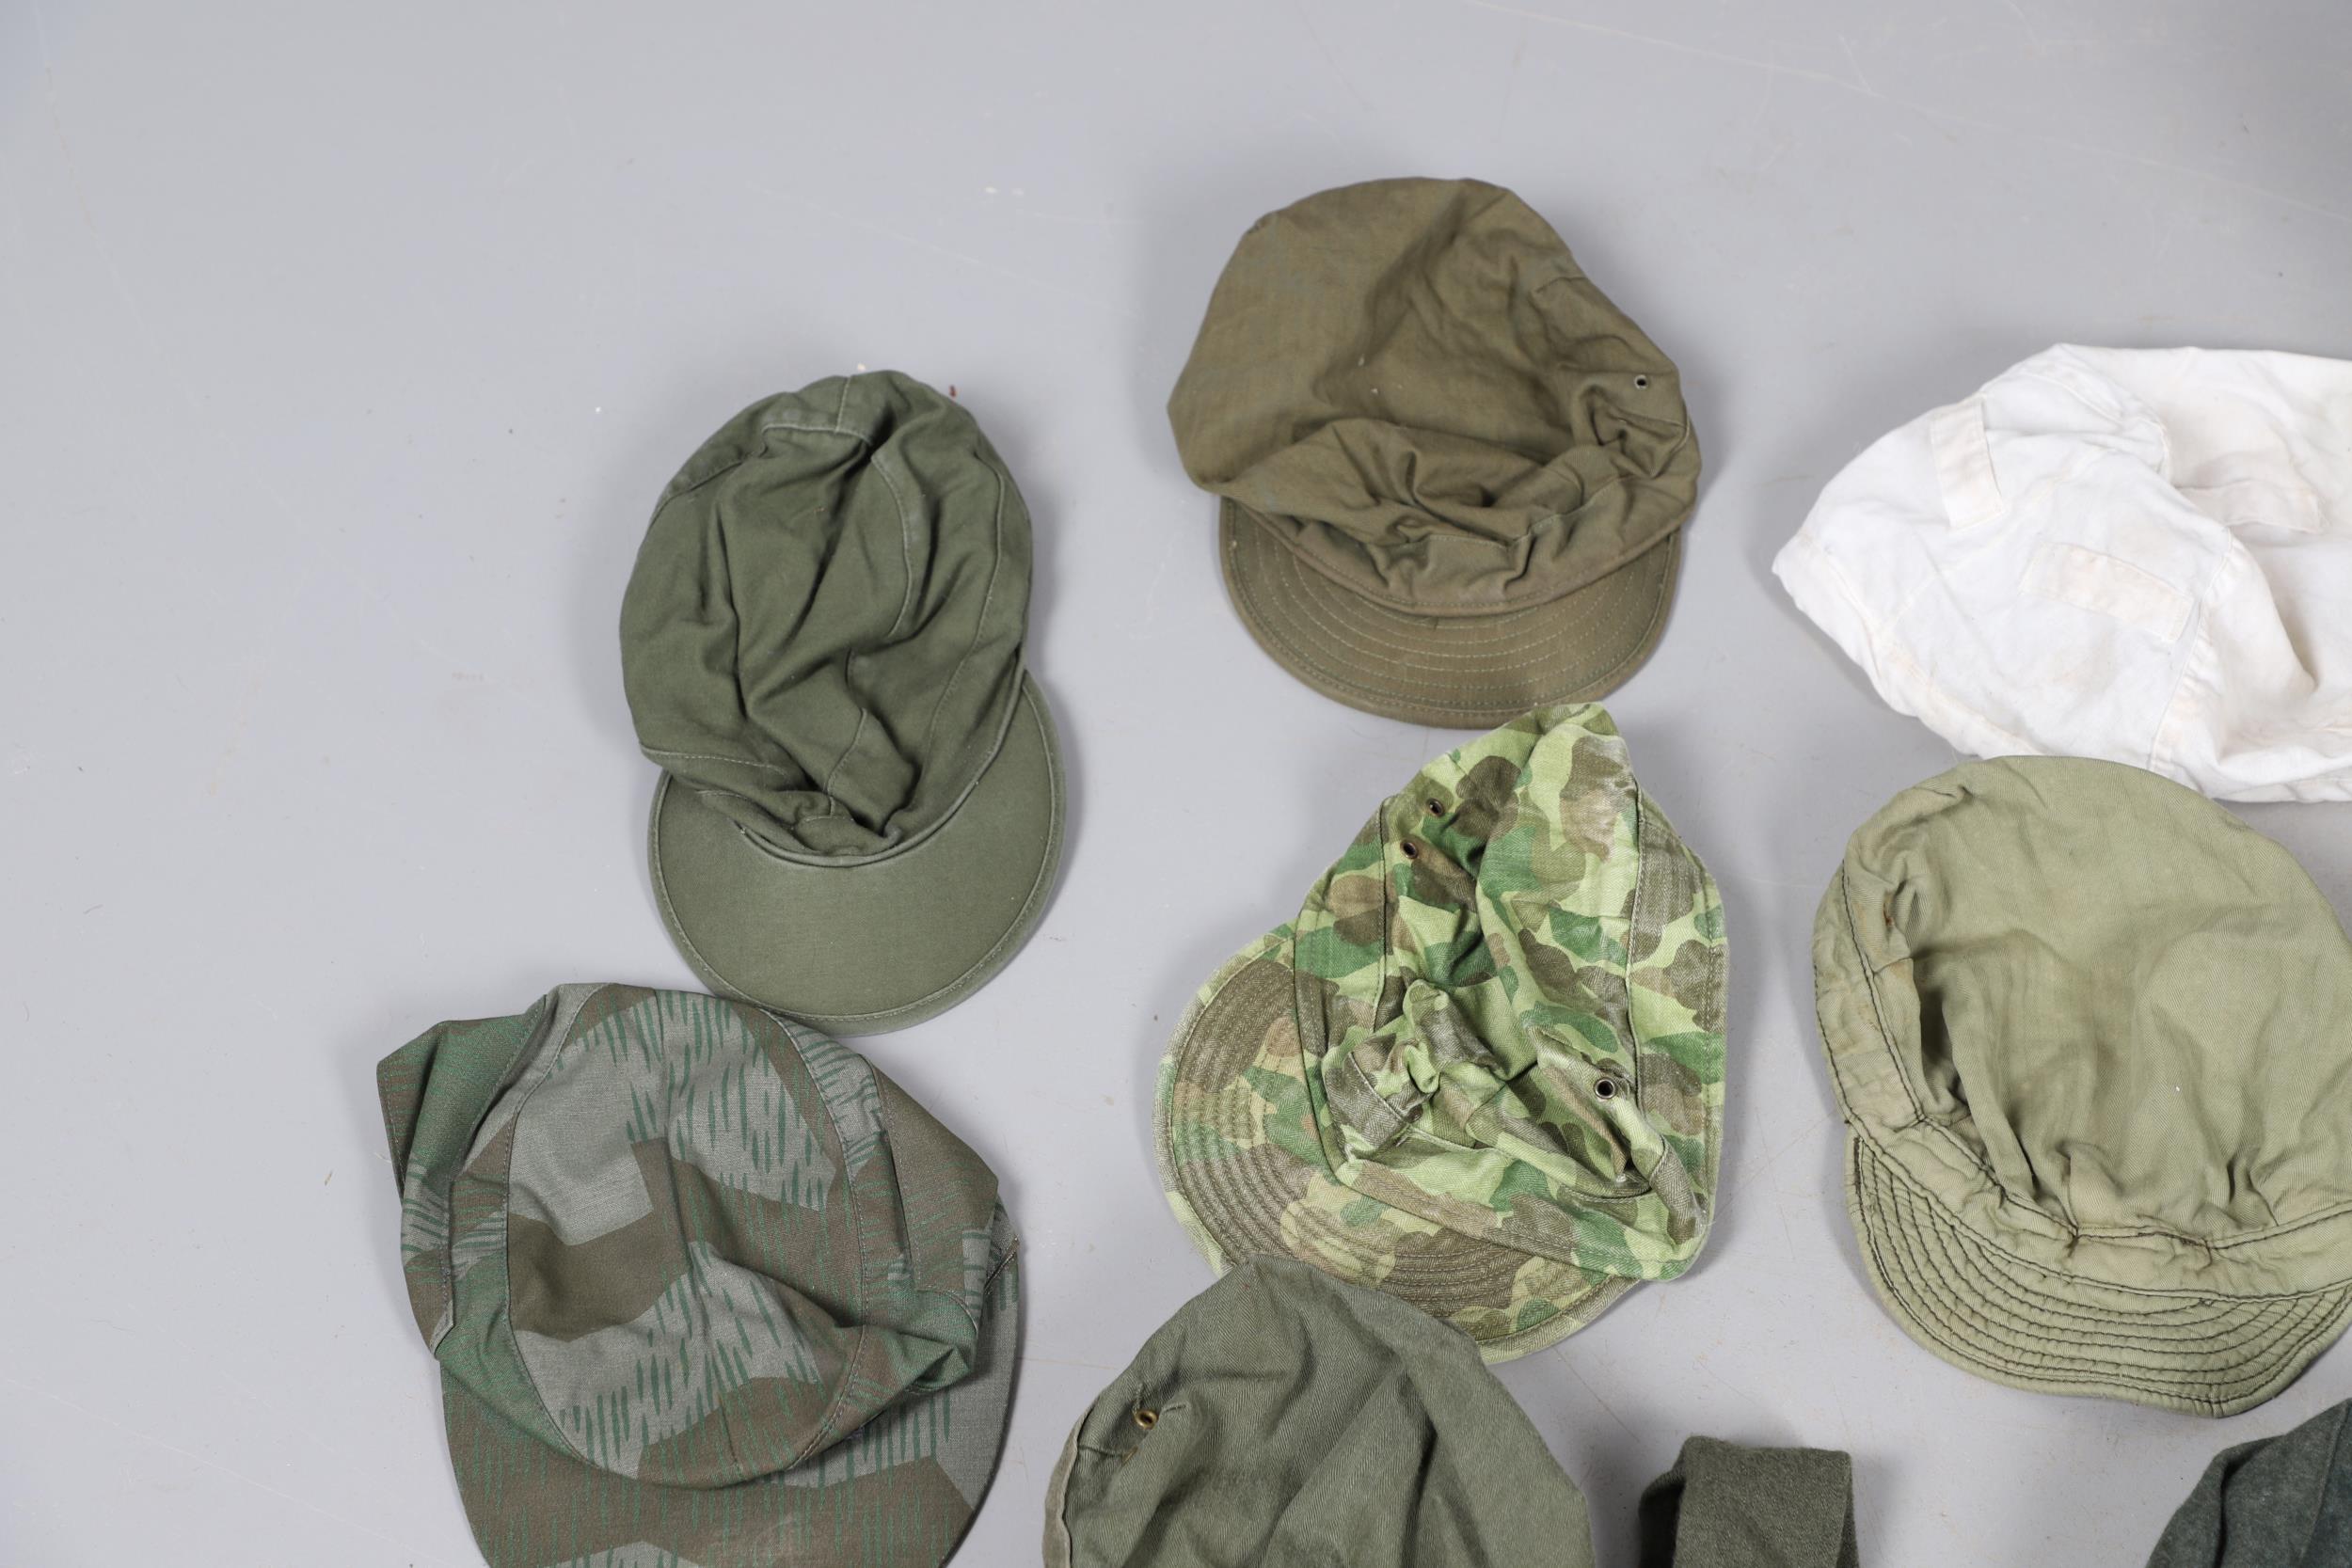 AN EXTENSIVE COLLECTION OF MILITARY UNIFORM CAPS, BERETS AND OTHER ITEMS. SECOND WORLD WAR AND LATER - Image 4 of 17